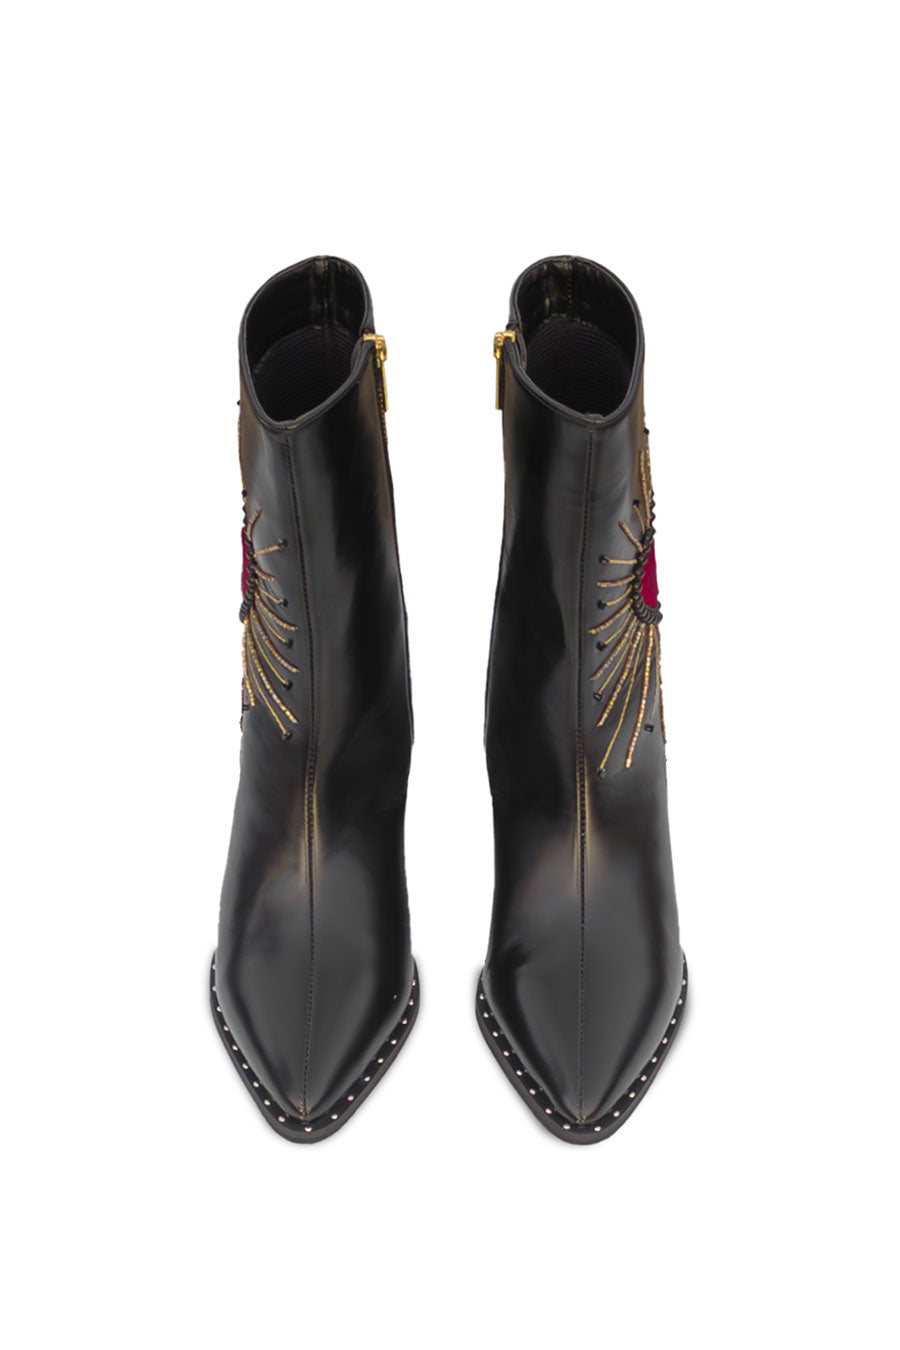 Black Embroidered Boots